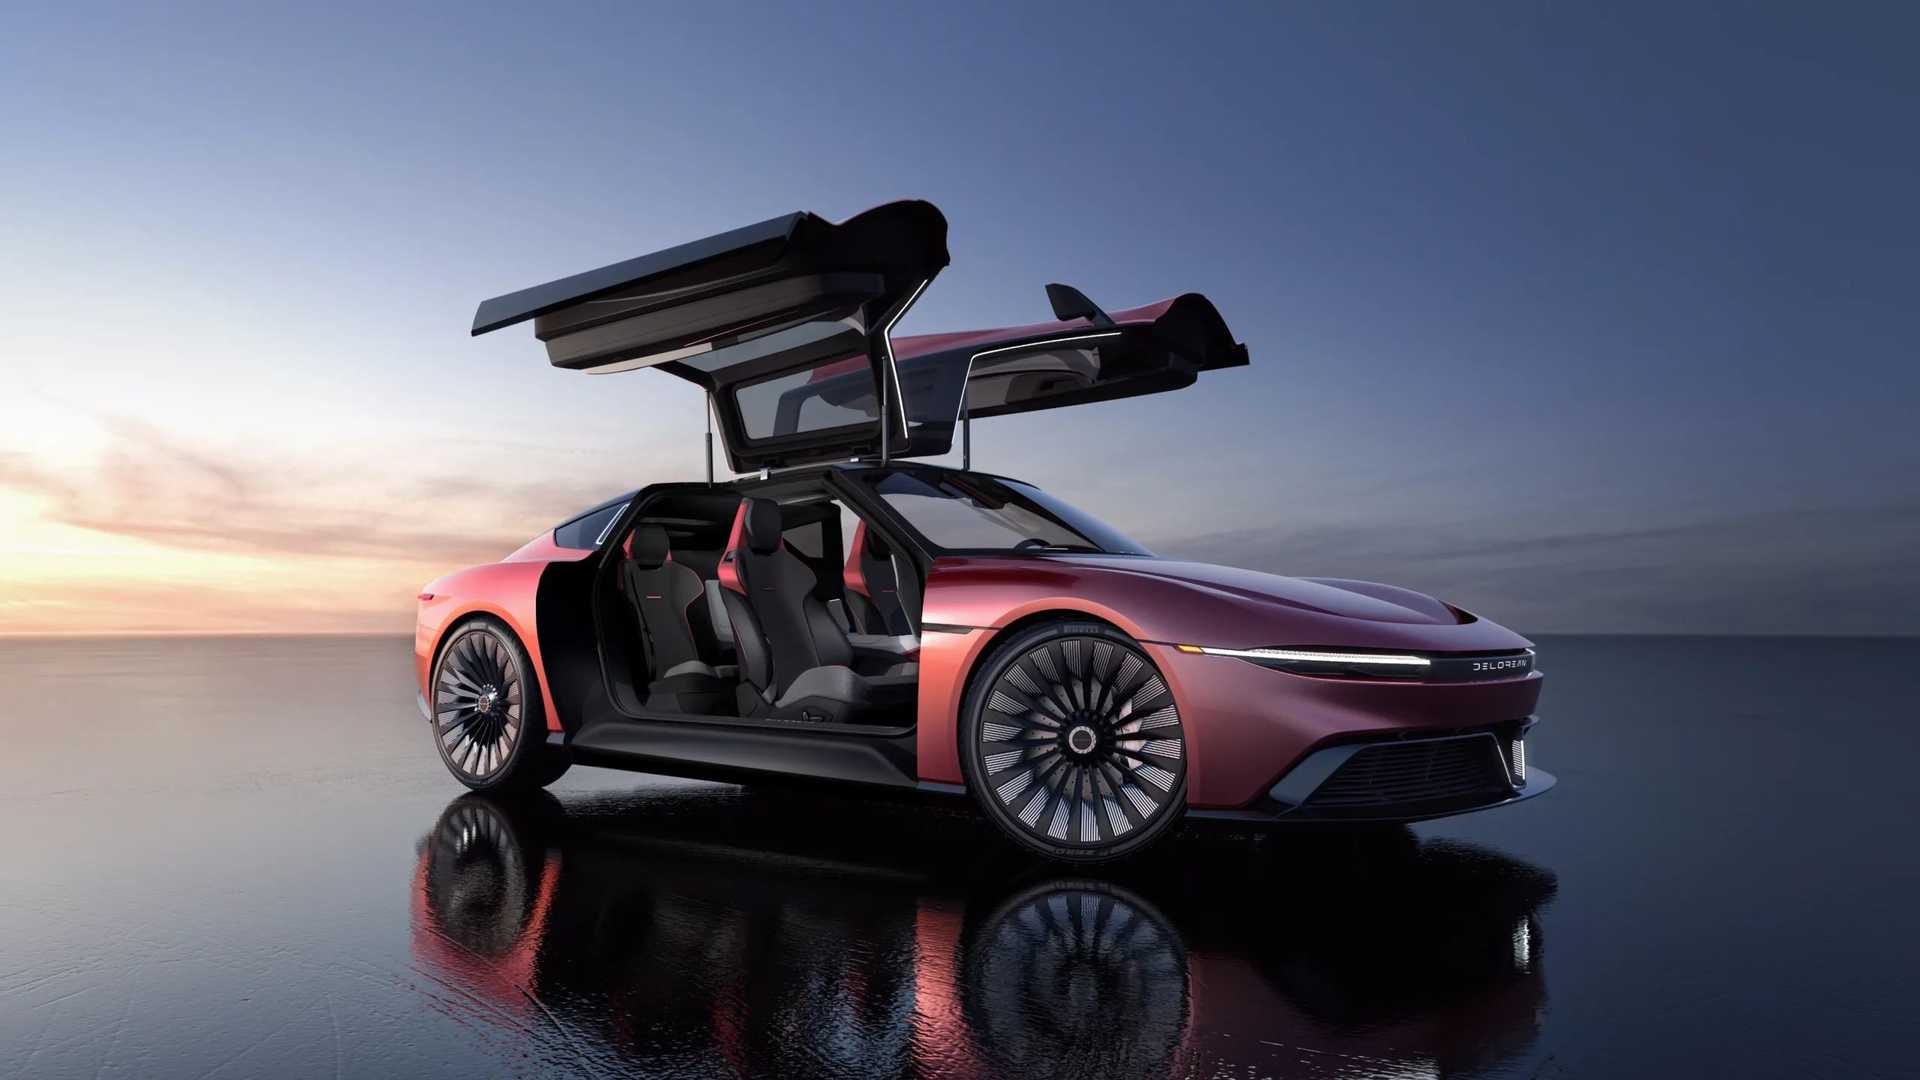 DeLorean Alpha5 revealed as electric coupe with iconic gullwing doors